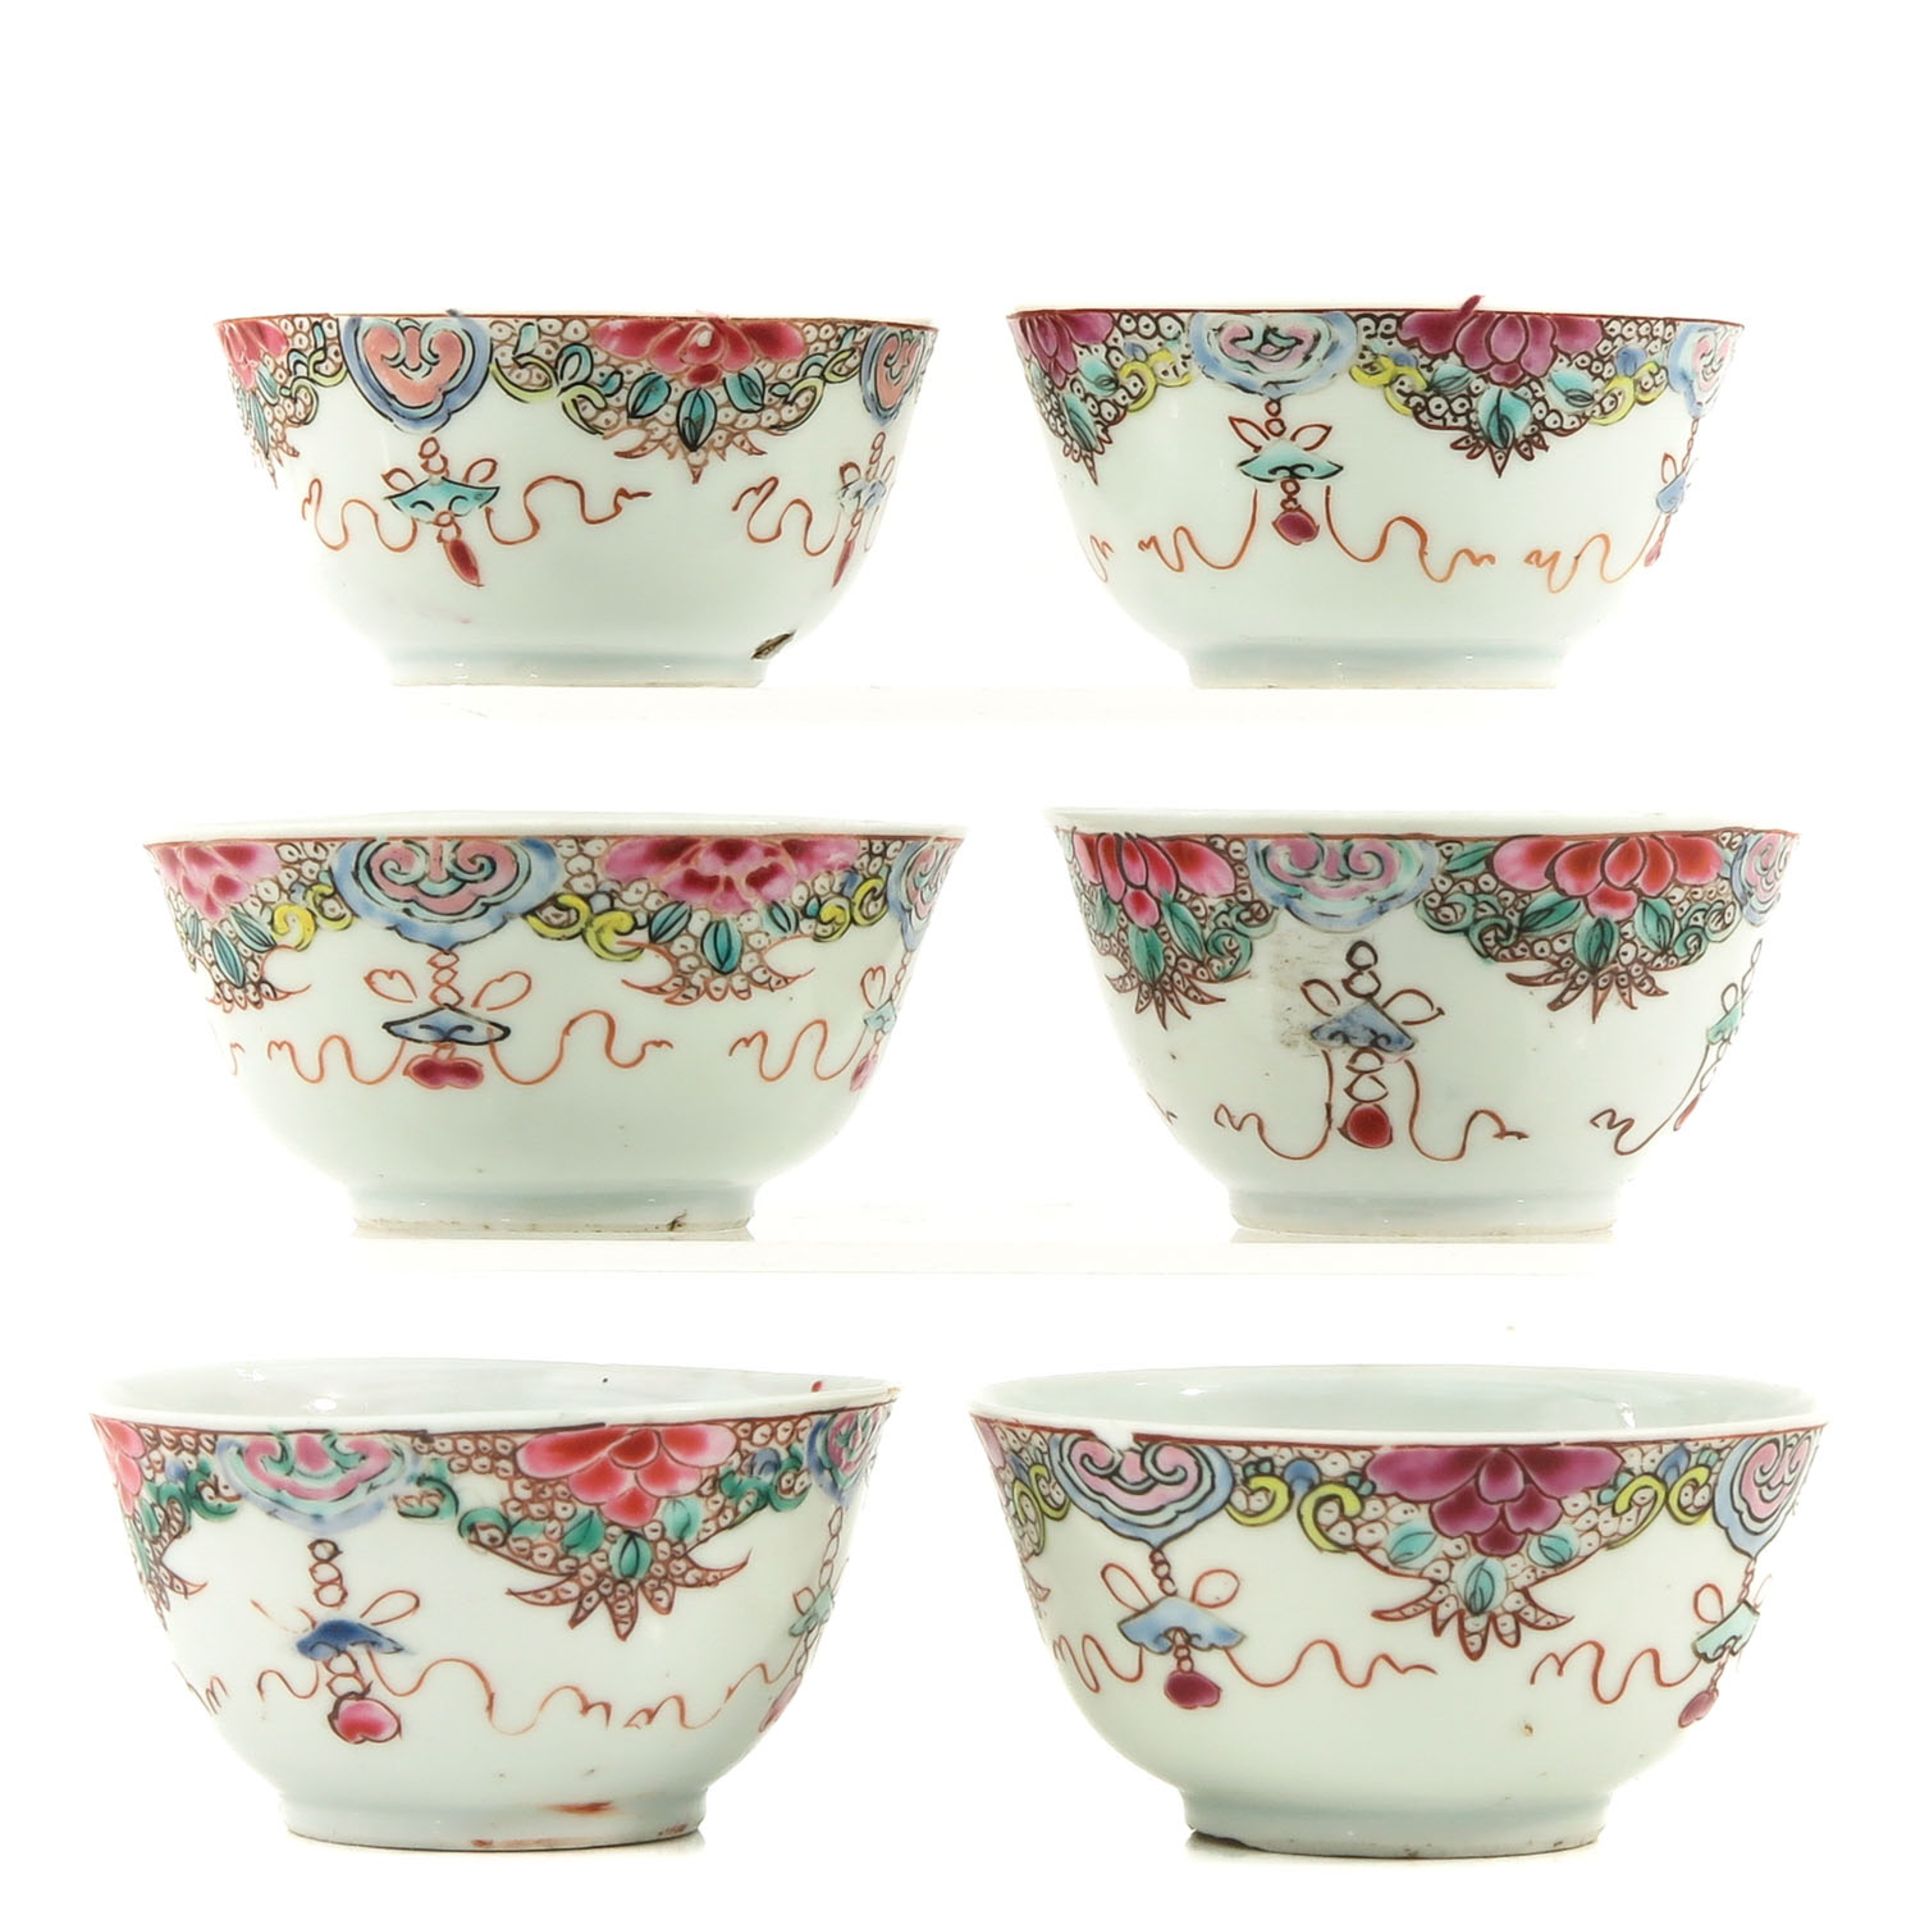 A Series of 6 Famille Rose Cups and Saucers - Image 4 of 10